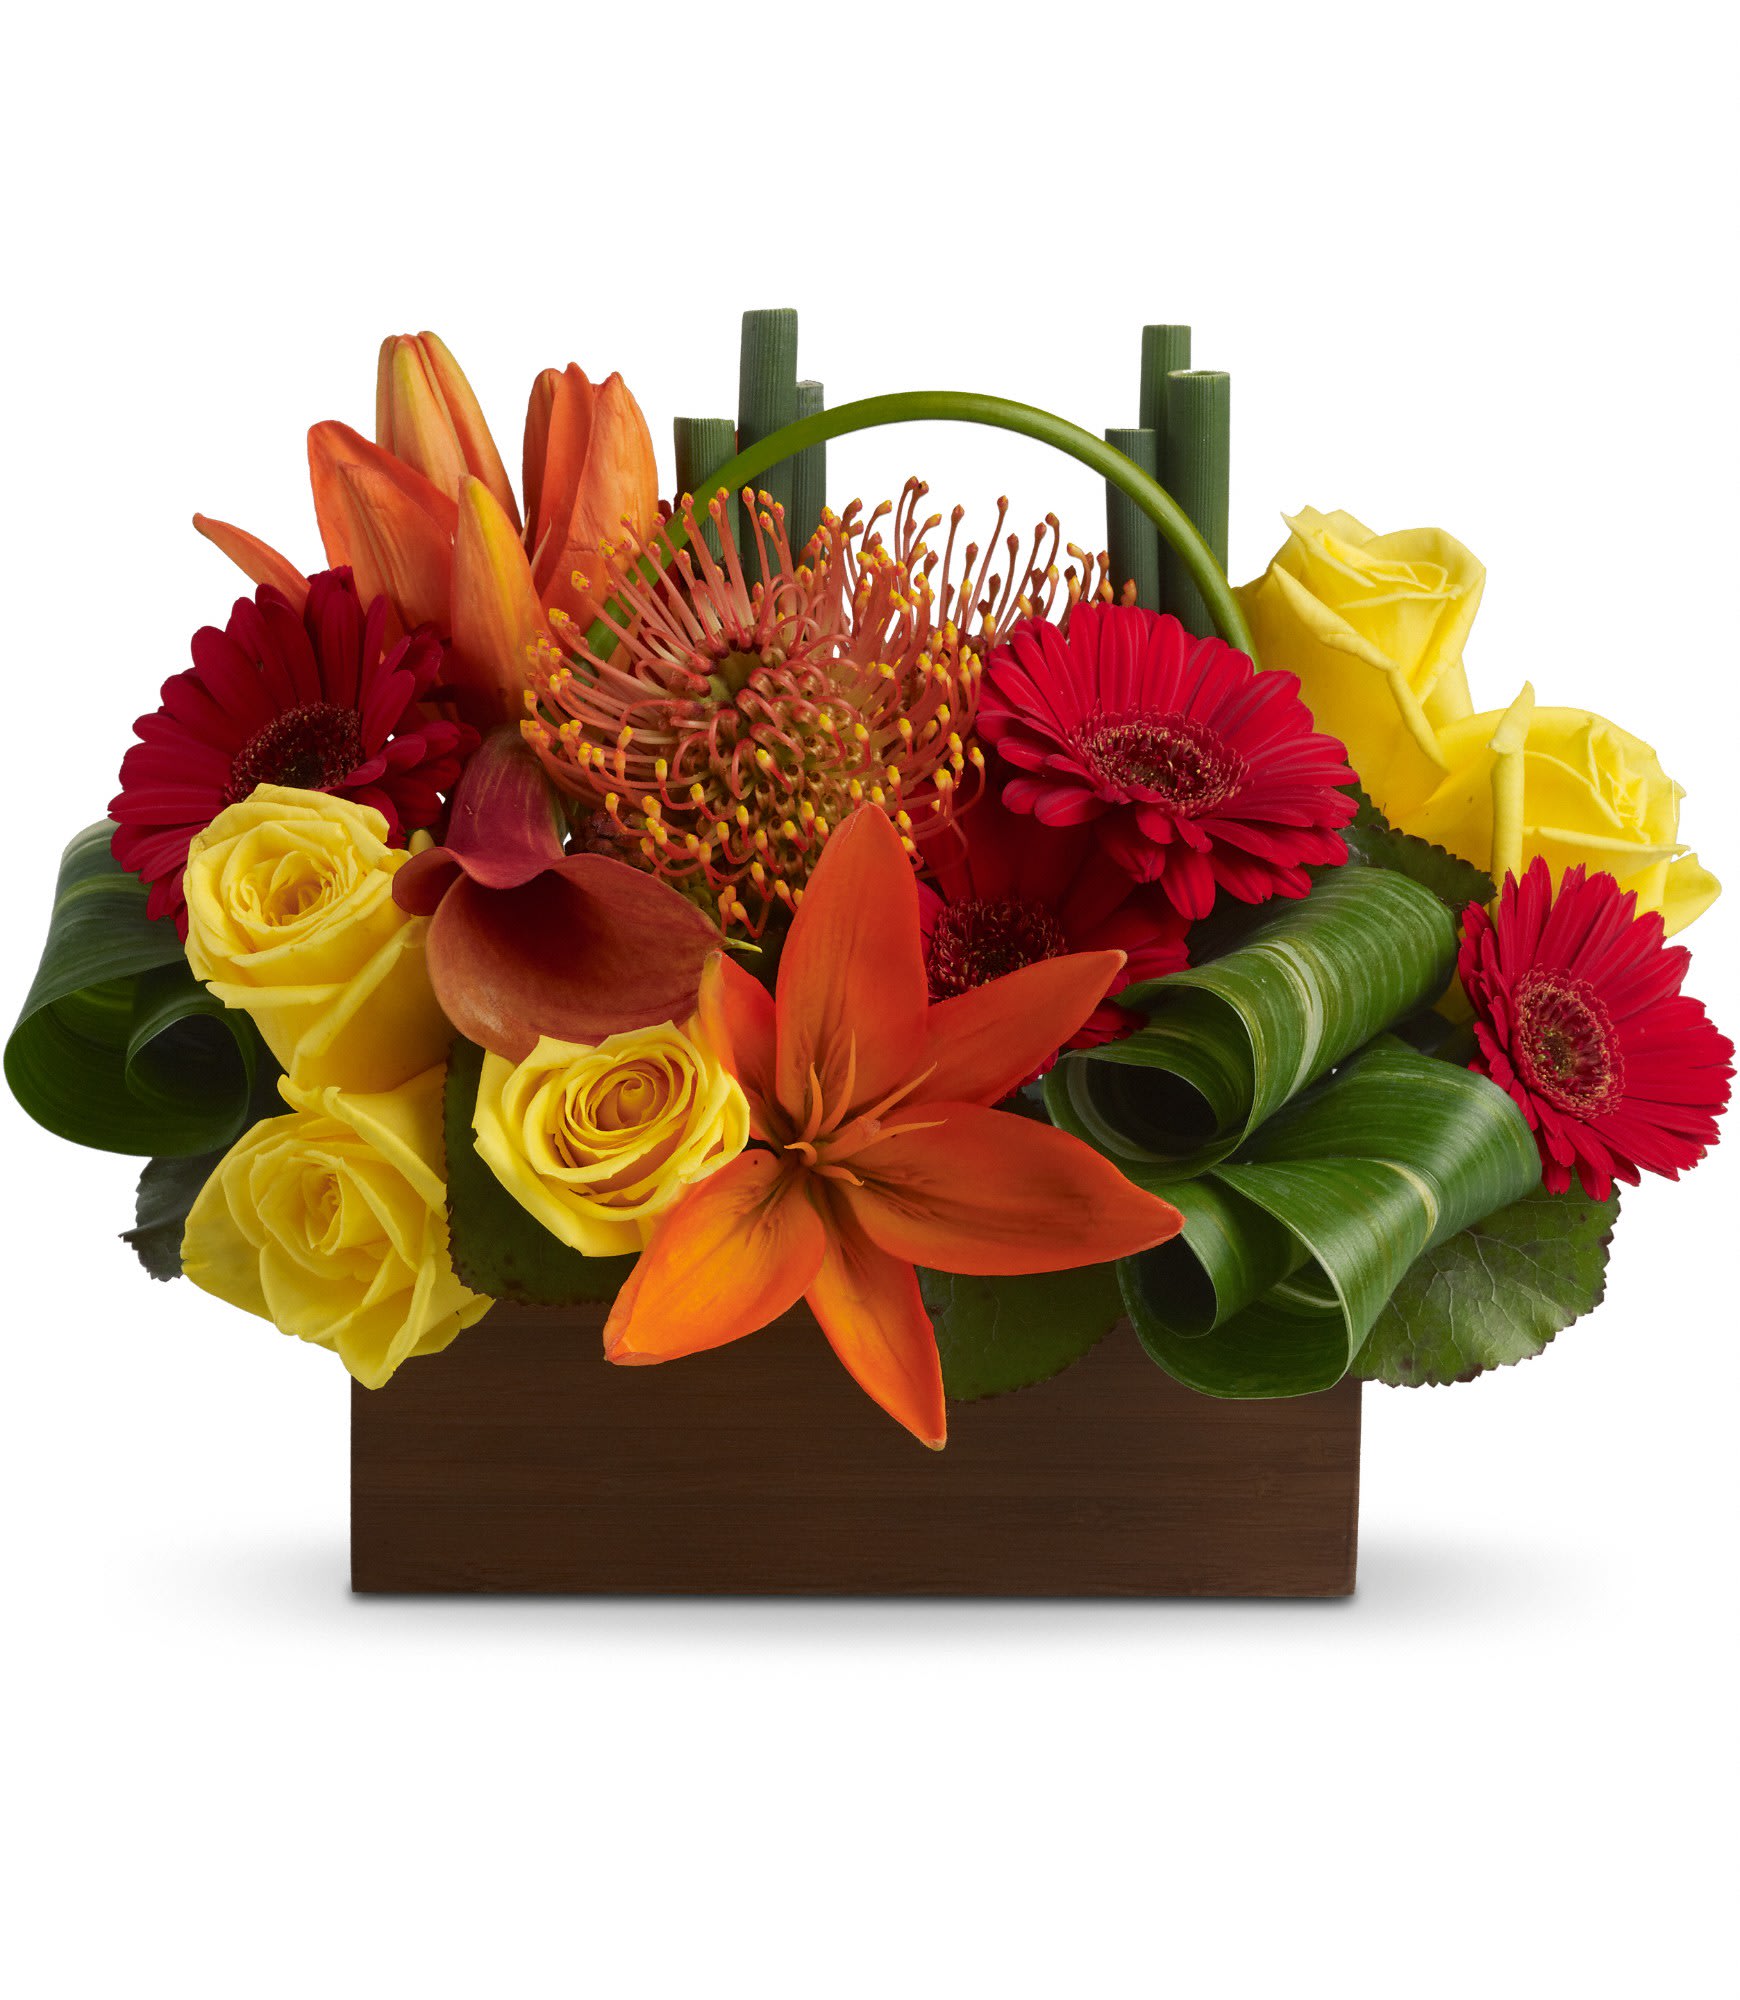 Teleflora's Bamboo Getaway  - Get away from bouquets as usual and choose this tropical adventure strikingly served up in a beautiful bamboo box. Exotic. Exciting. Extremely beautiful!    Yellow roses, dark orange miniature callas, orange asiatic lilies and pin cushion protea, red miniature gerberas and more are delivered in a unique rectangular bamboo container. It's definitely a departure from the ordinary!    Approximately 13 1/4&quot; W x 10&quot; H    Orientation: One-Sided        As Shown : T85-3A      Deluxe : T85-3B      Premium : T85-3C    